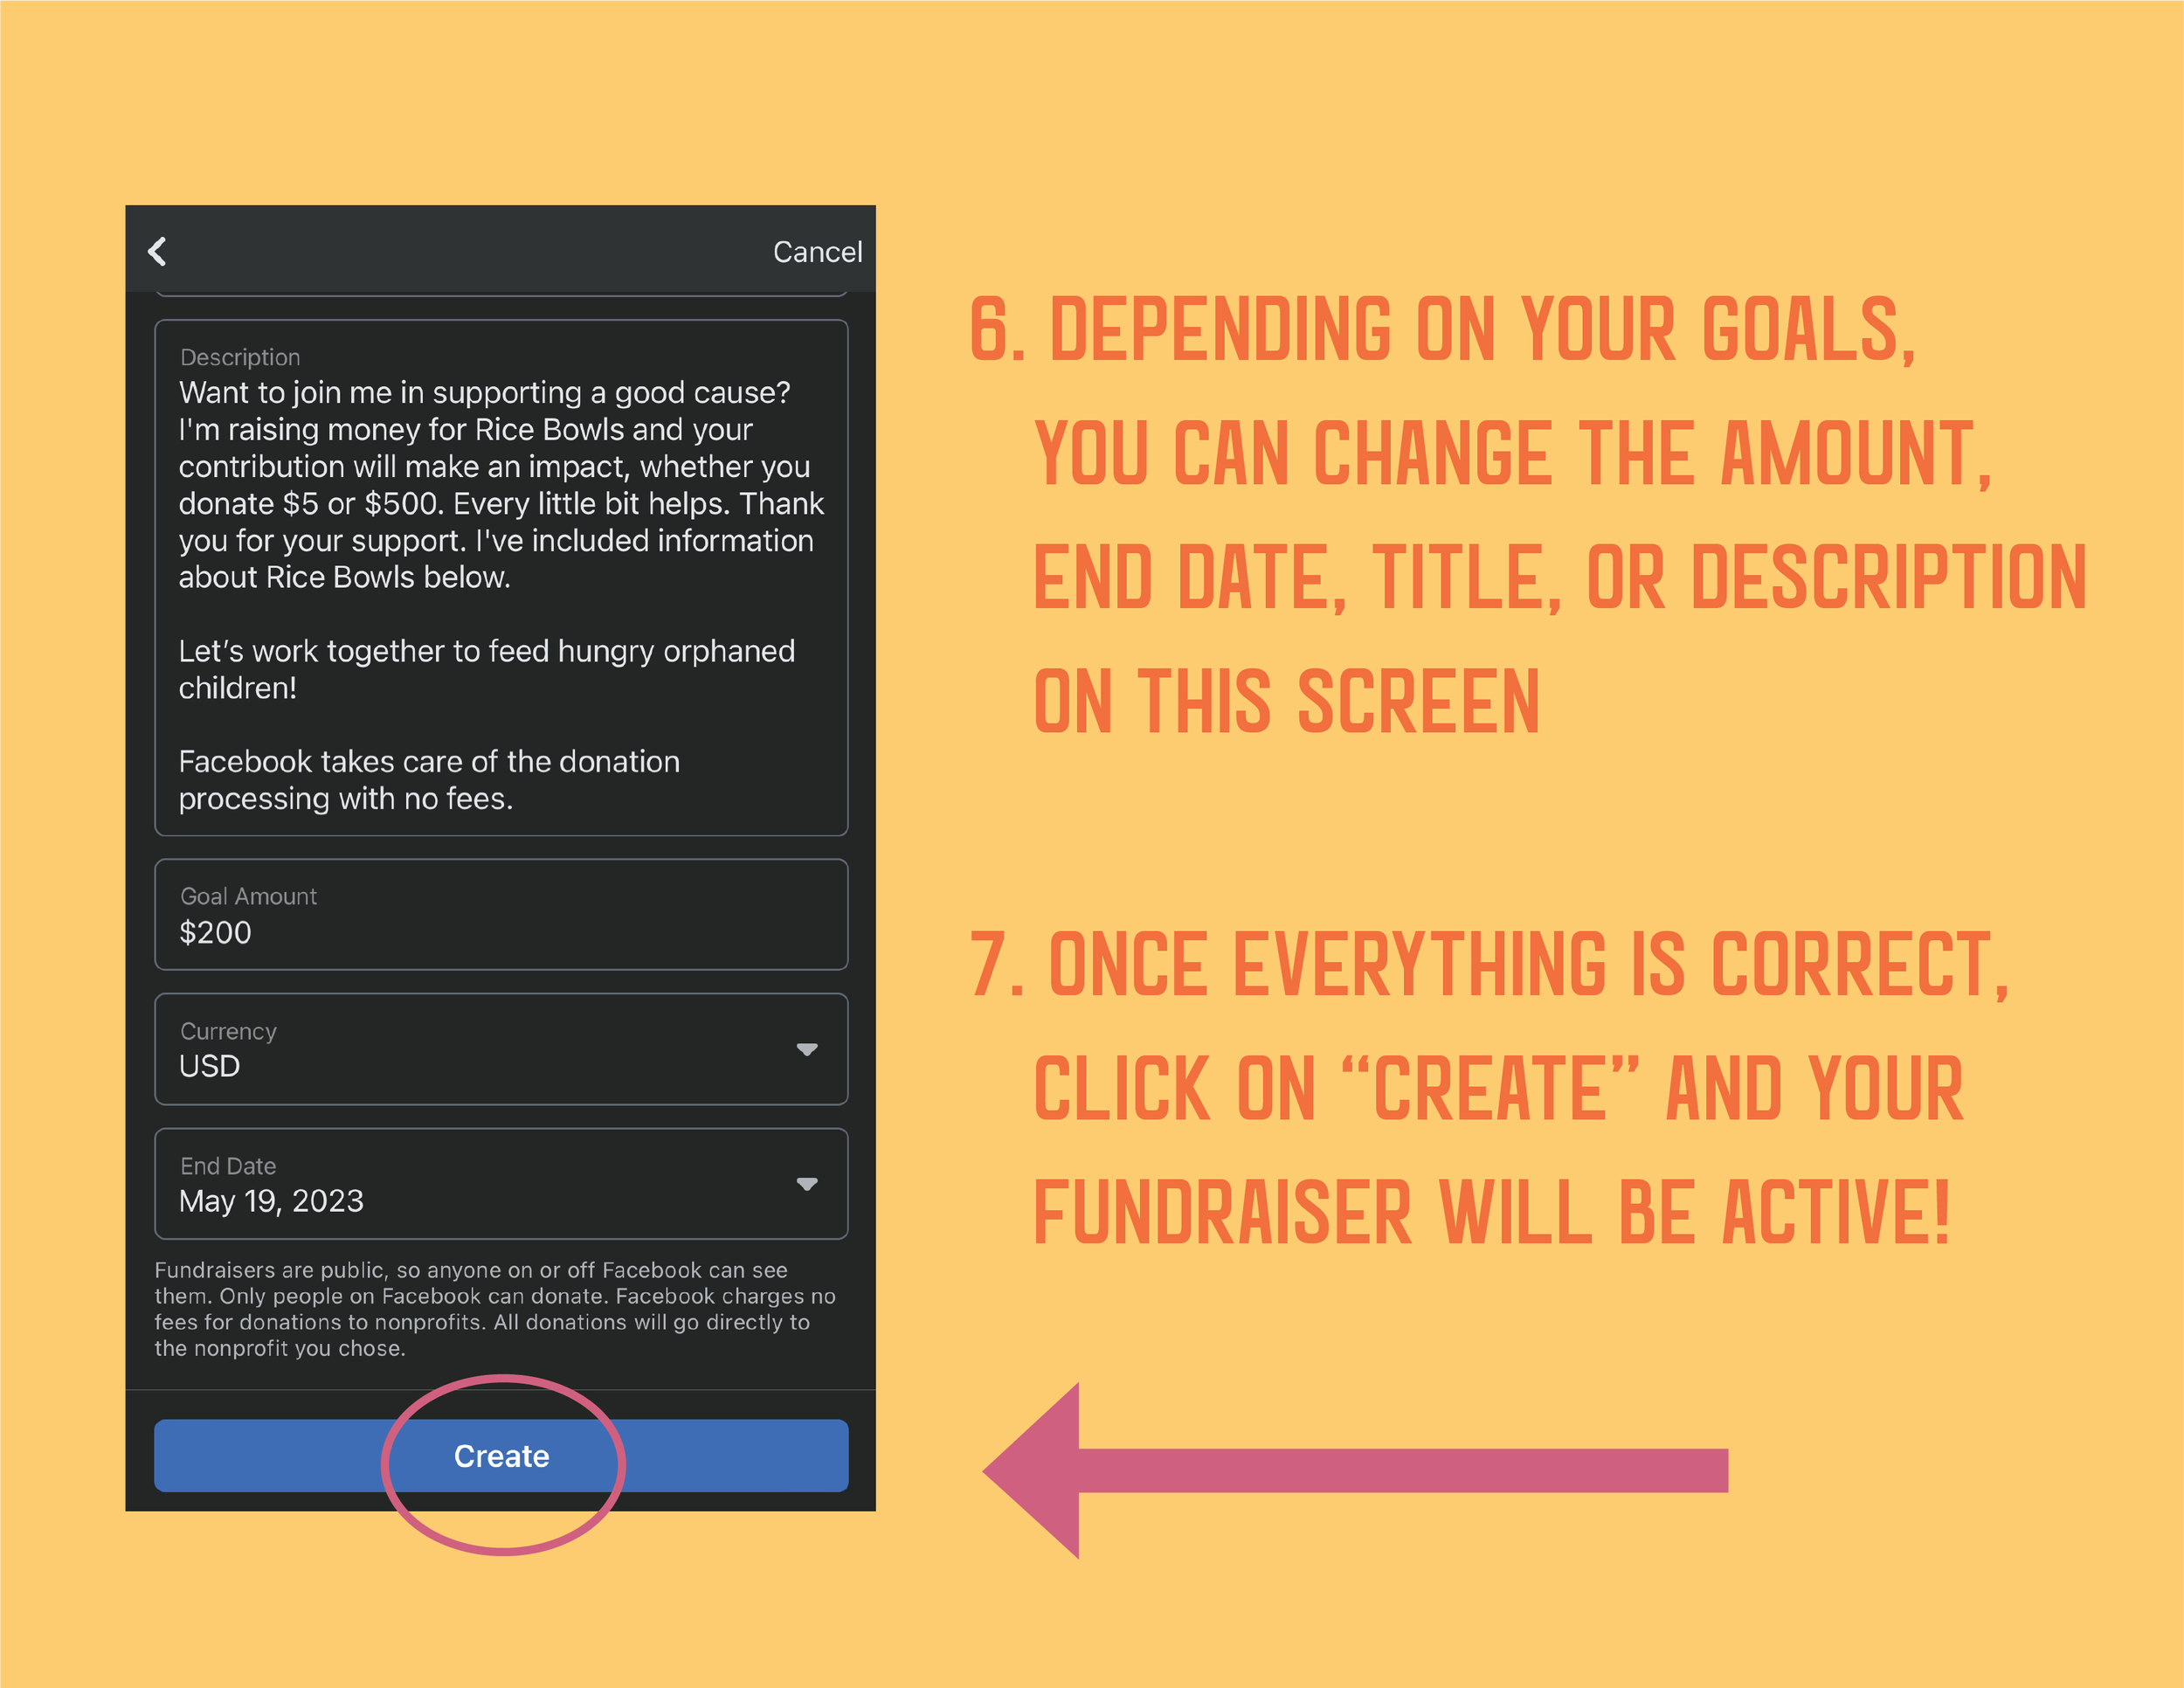 fb-fundraiser-guide-16.png